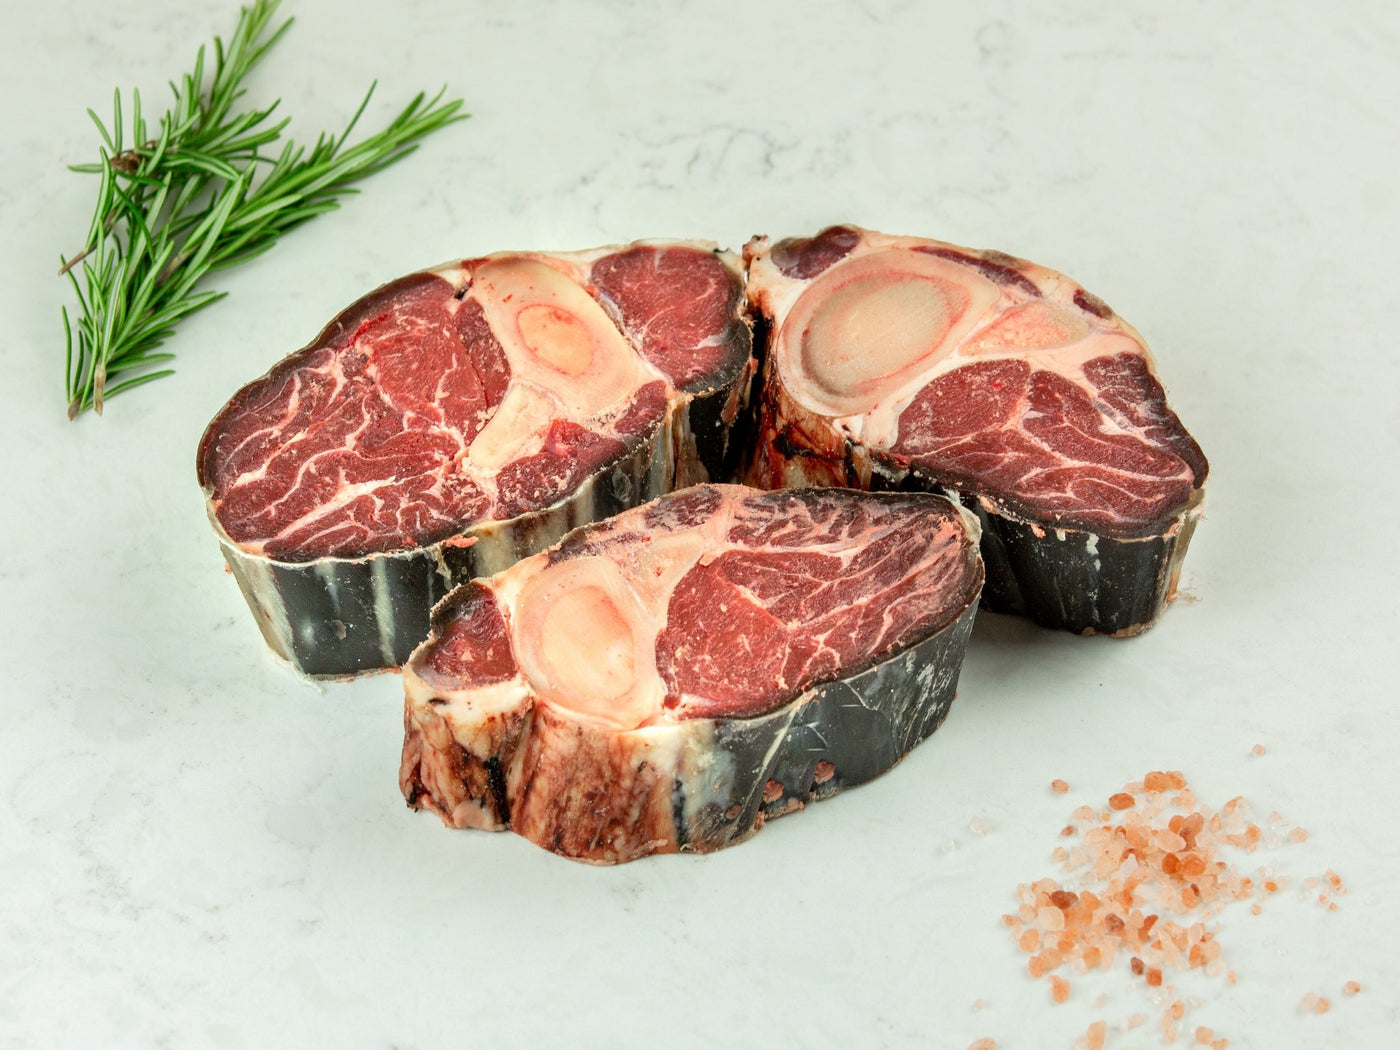 Grass Fed, Dry-Aged Shin of Beef - Beef - Thomas Joseph Butchery - Ethical Dry-Aged Meat The Best Steak UK Thomas Joseph Butchery